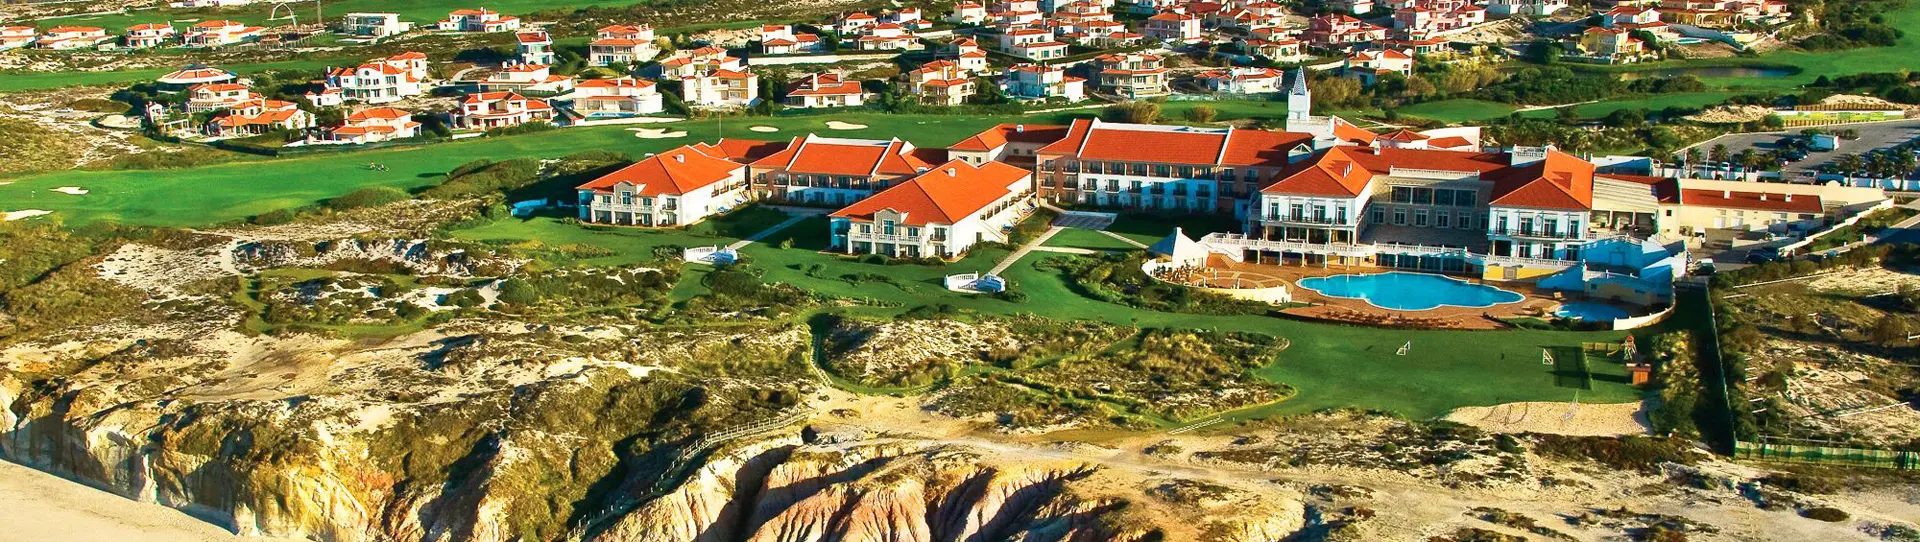 Portugal golf holidays - 7 nights BB & 5 Golf Rounds<br>Silver Coast Golf Package - Photo 3